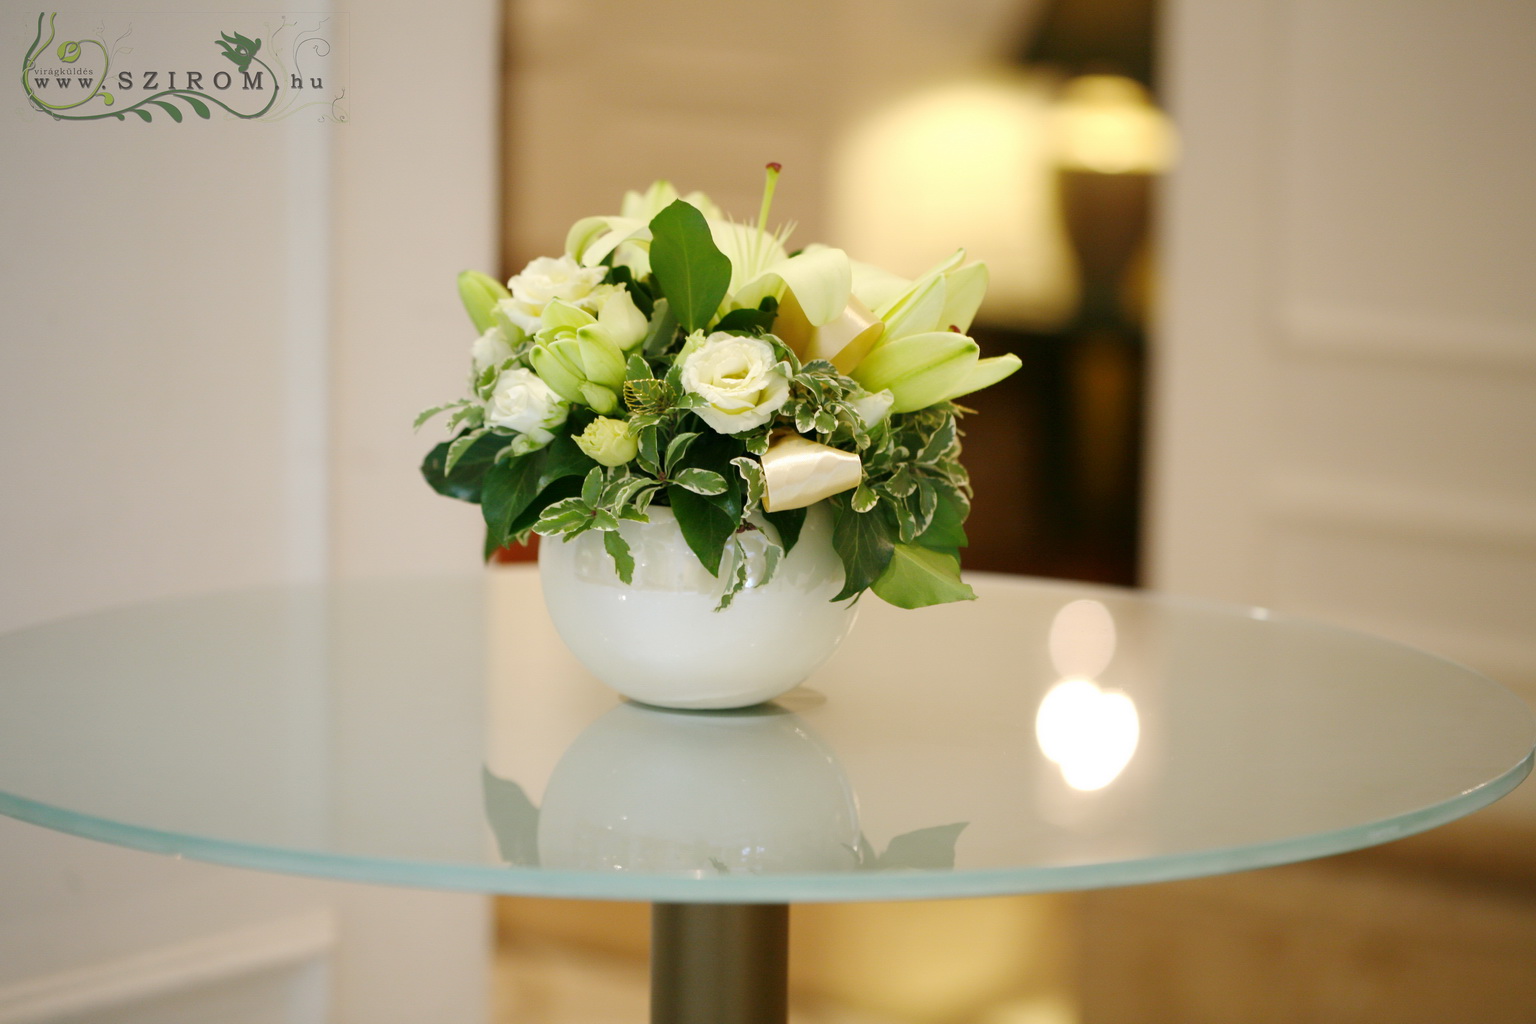 flower delivery Budapest - Lily centerpiece, Corinthia Hotel Budapest (lisianthus, Asiatic lilies, cream), wedding